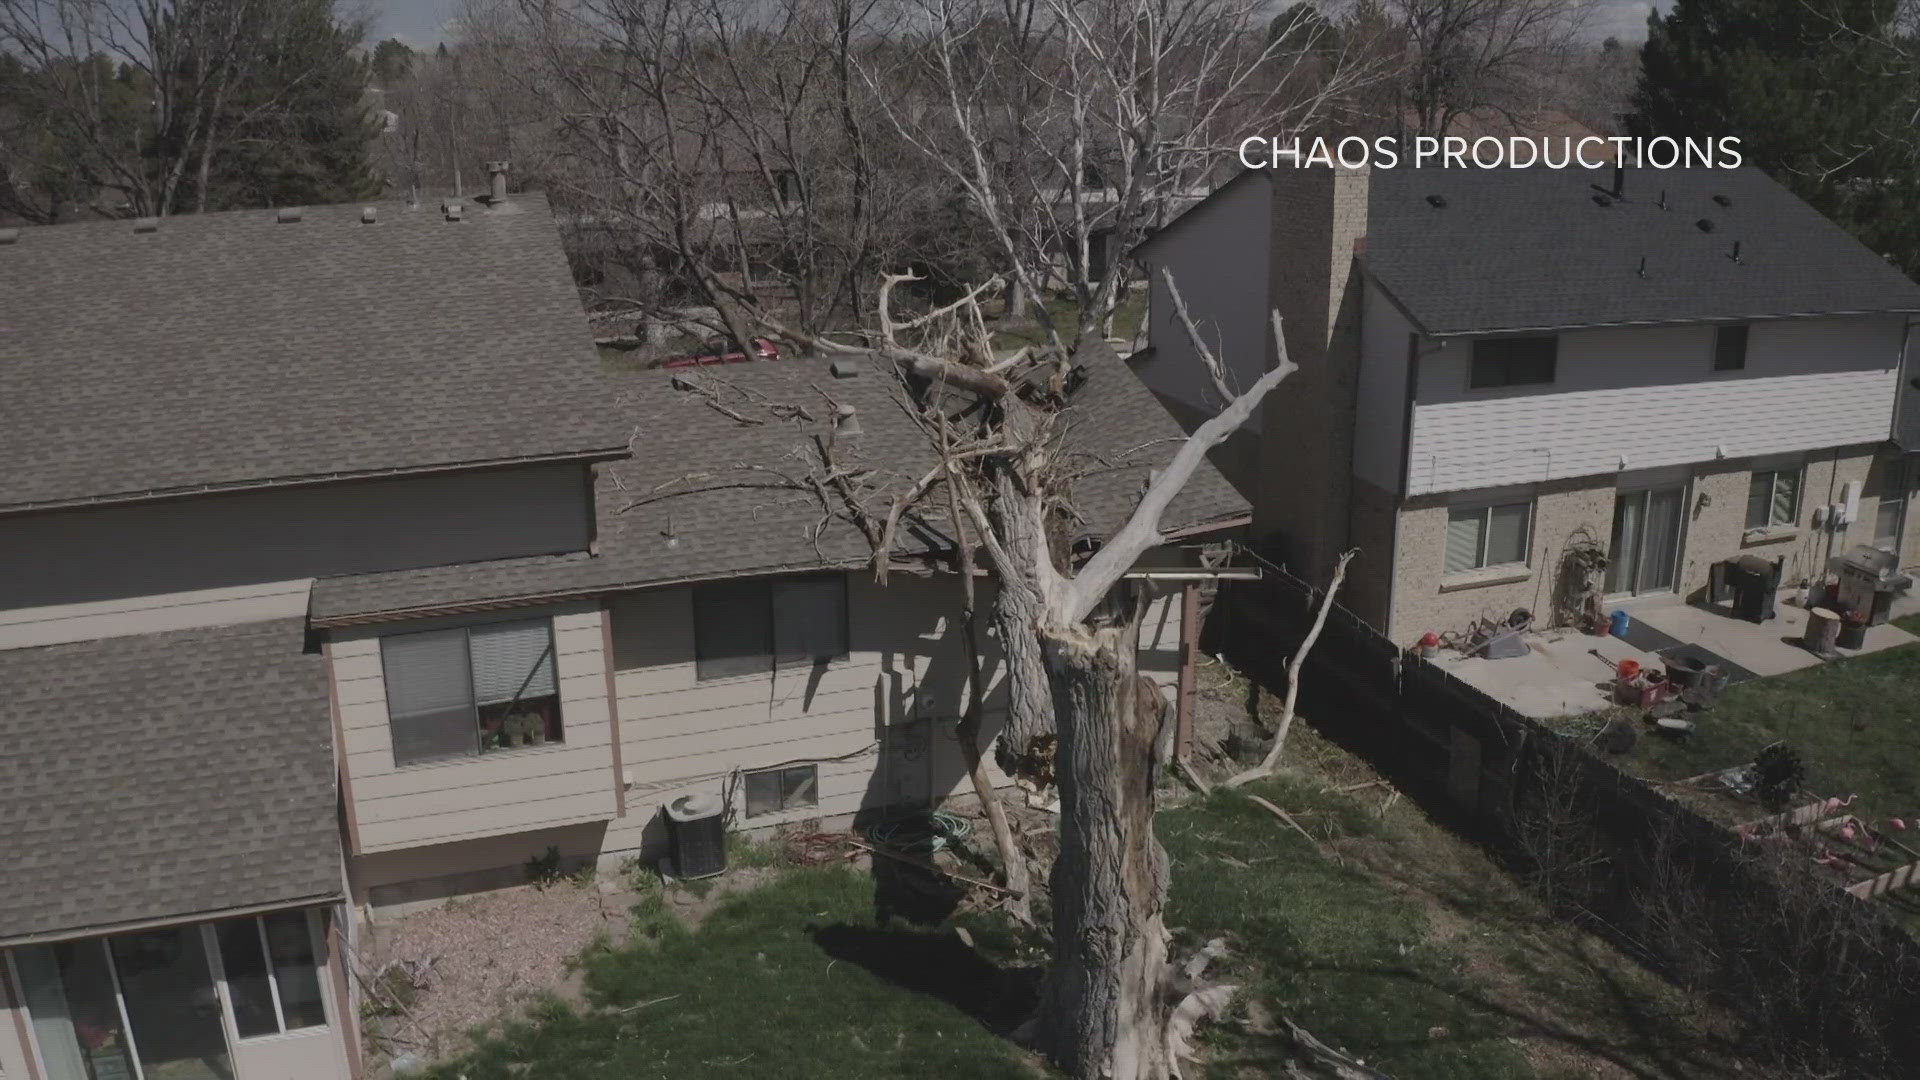 When a windstorm toppled a 54-foot tree on top of a veteran's home the estimates for a fix stunned Pat Smith – but volunteer contractors helped him rebuild.